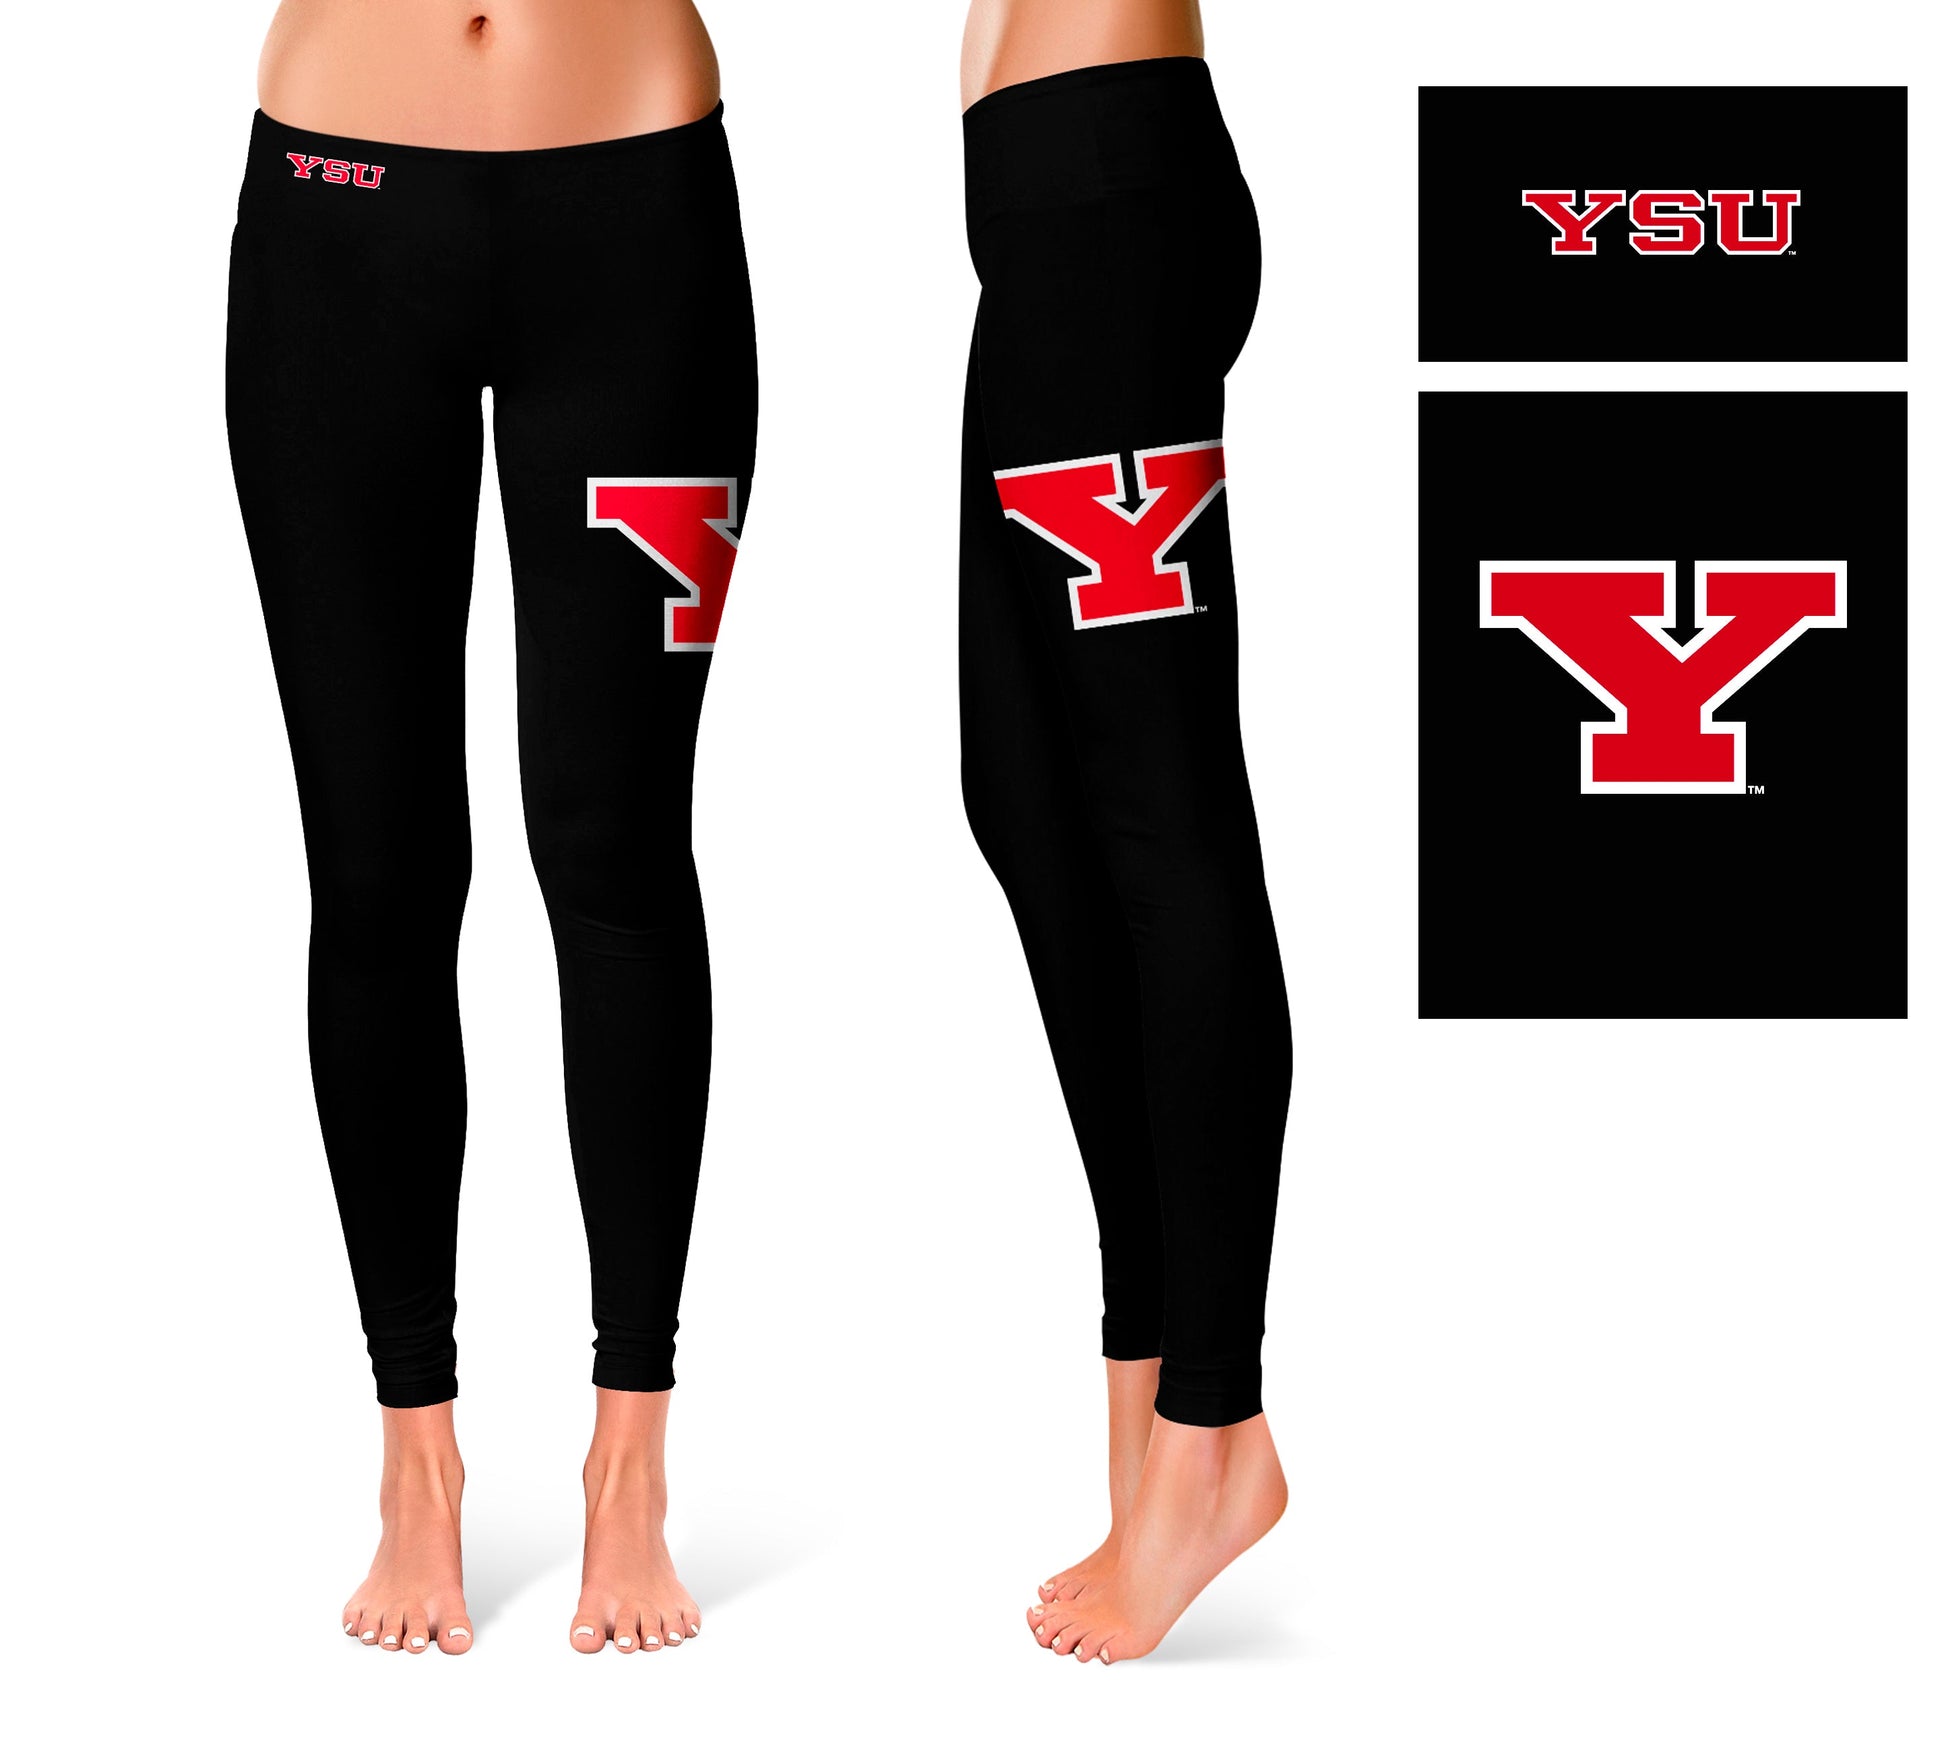 Youngstown State Penguins Large Logo on Thigh Black Yoga Leggings for Women  2.5 Waist Tights